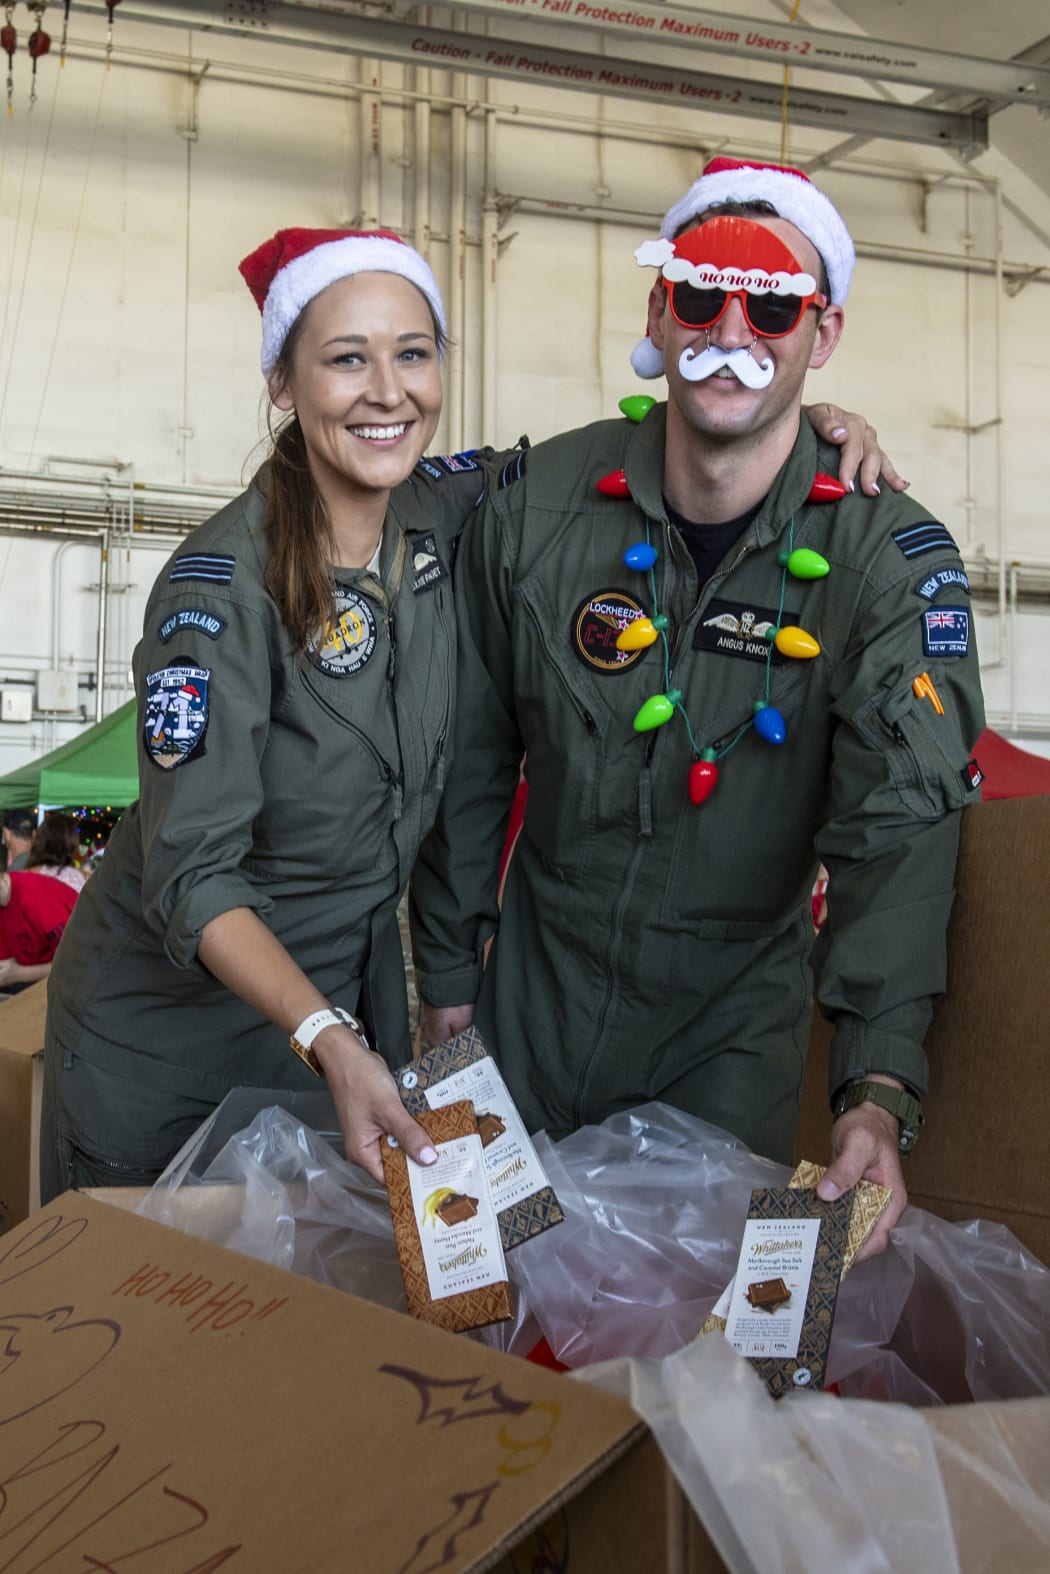 RNZAF aircraft captain Flight Lieutenant Michal-Louise Paget (left), says the RNZAF crew have included some ‘Kiwi treats’ such as New Zealand chocolate in the aid bundles as part of Operation Christmas Drop.